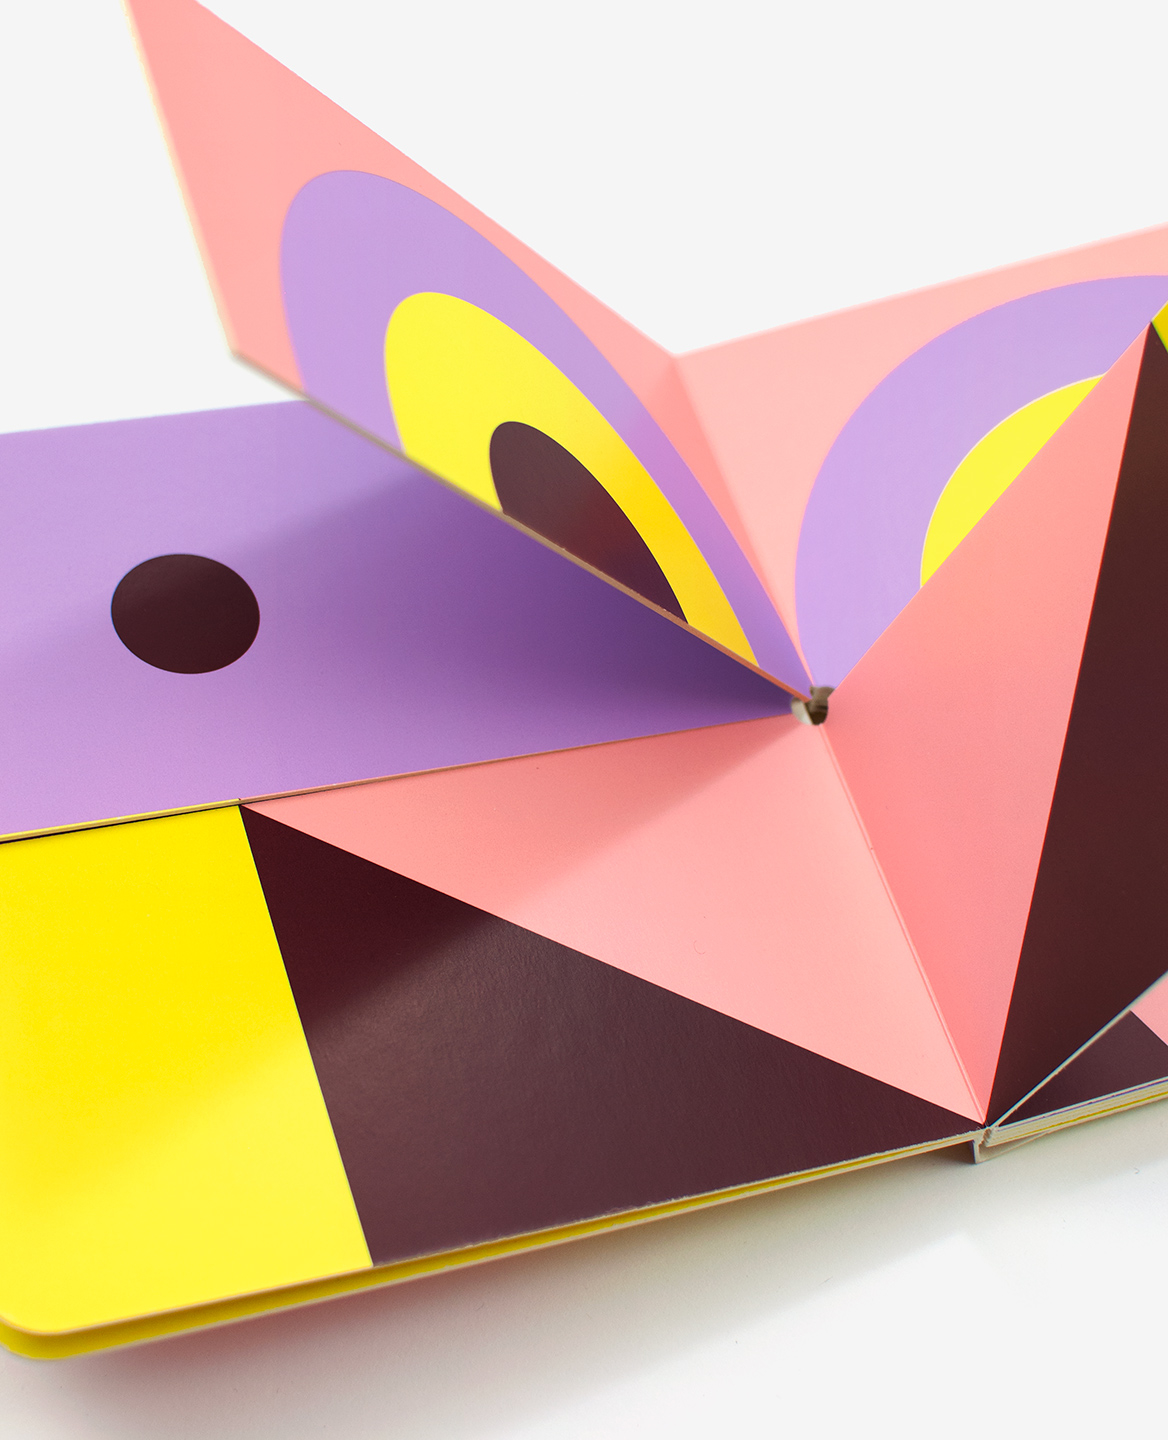 Detail of the mix ‘n’ match board book Birds by Damien Poulain